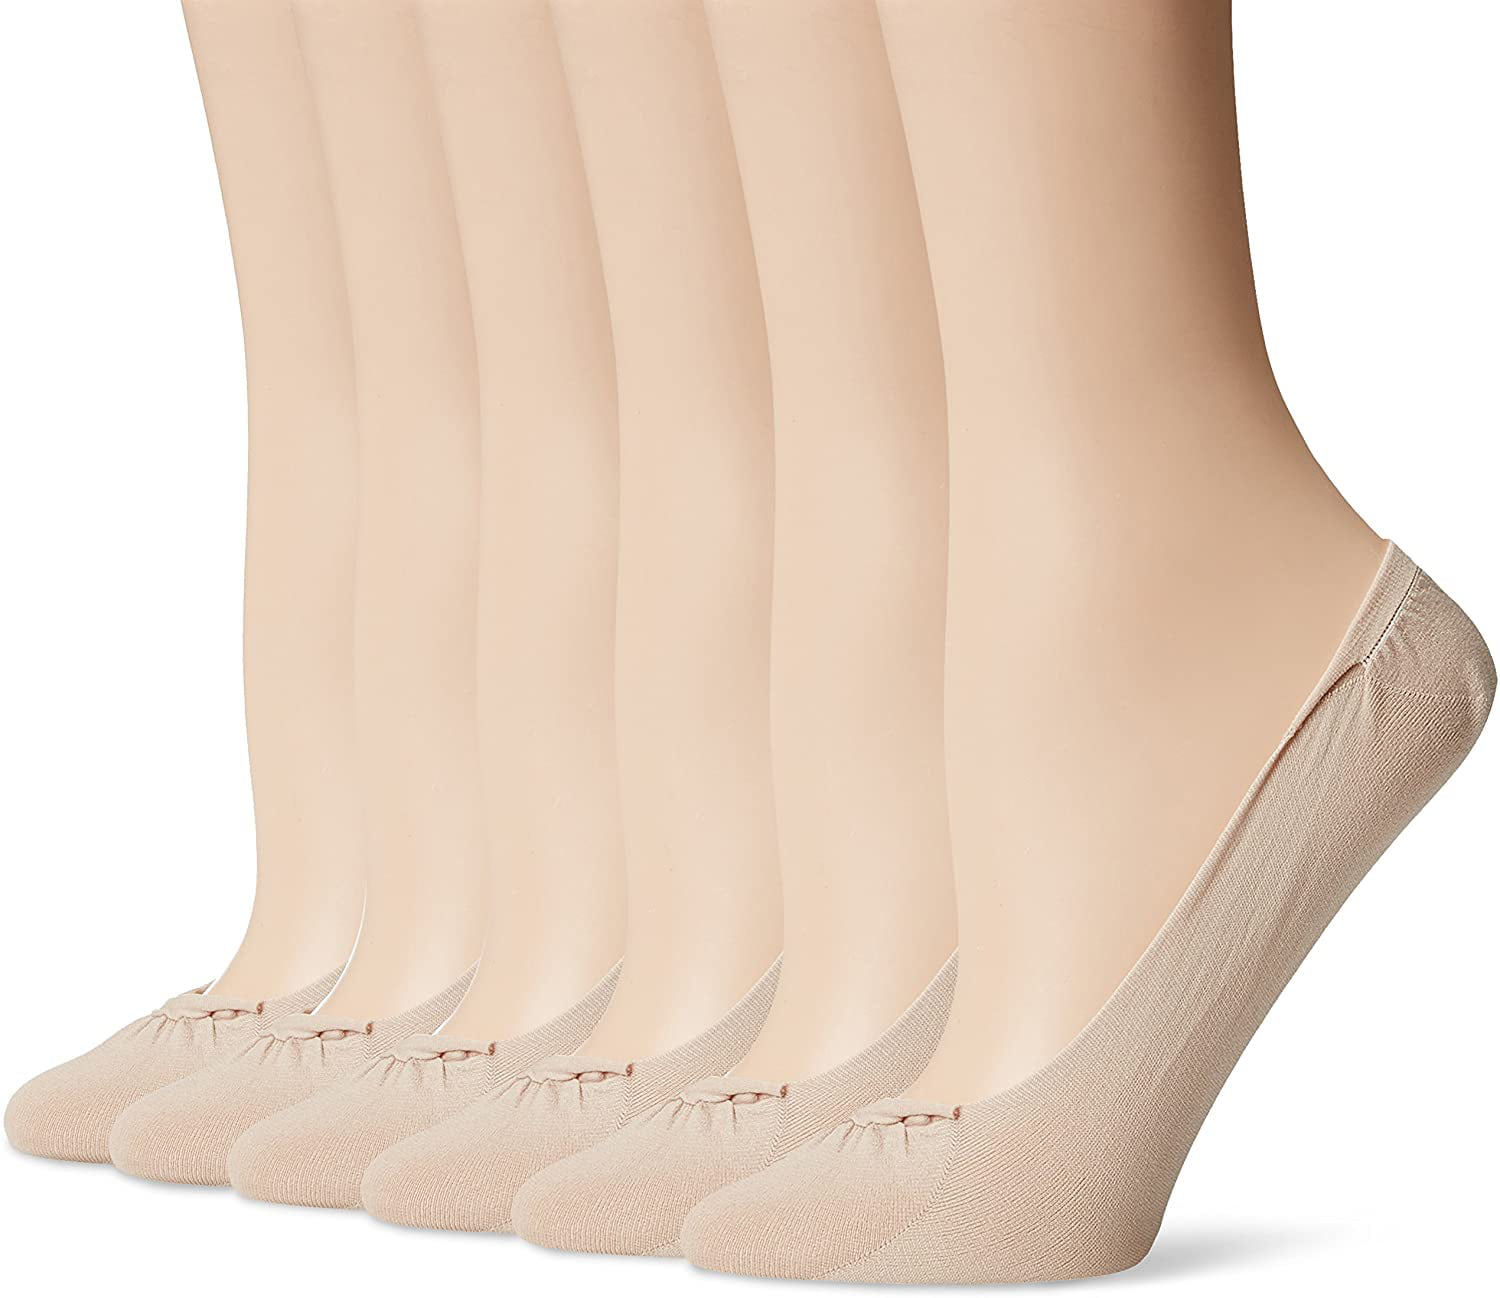 PEDS Womens Ultra Sheer Seamless Low Cut Liner No Show Socks 6 Pairs